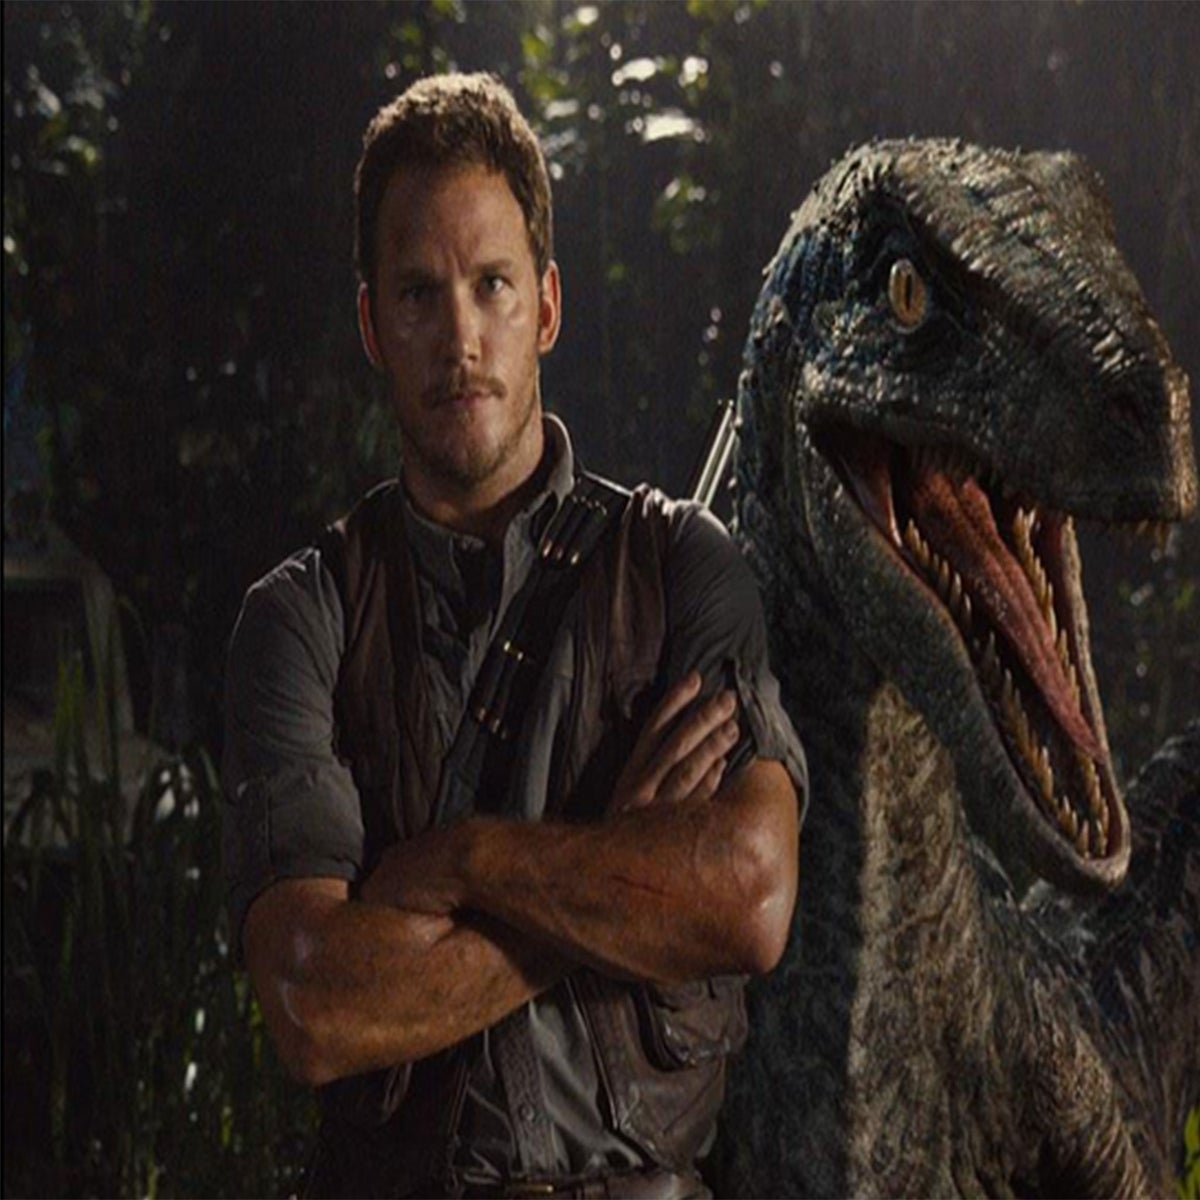 https://static.independent.co.uk/s3fs-public/thumbnails/image/2014/12/18/11/jurassic-world.jpg?width=1200&height=1200&fit=crop